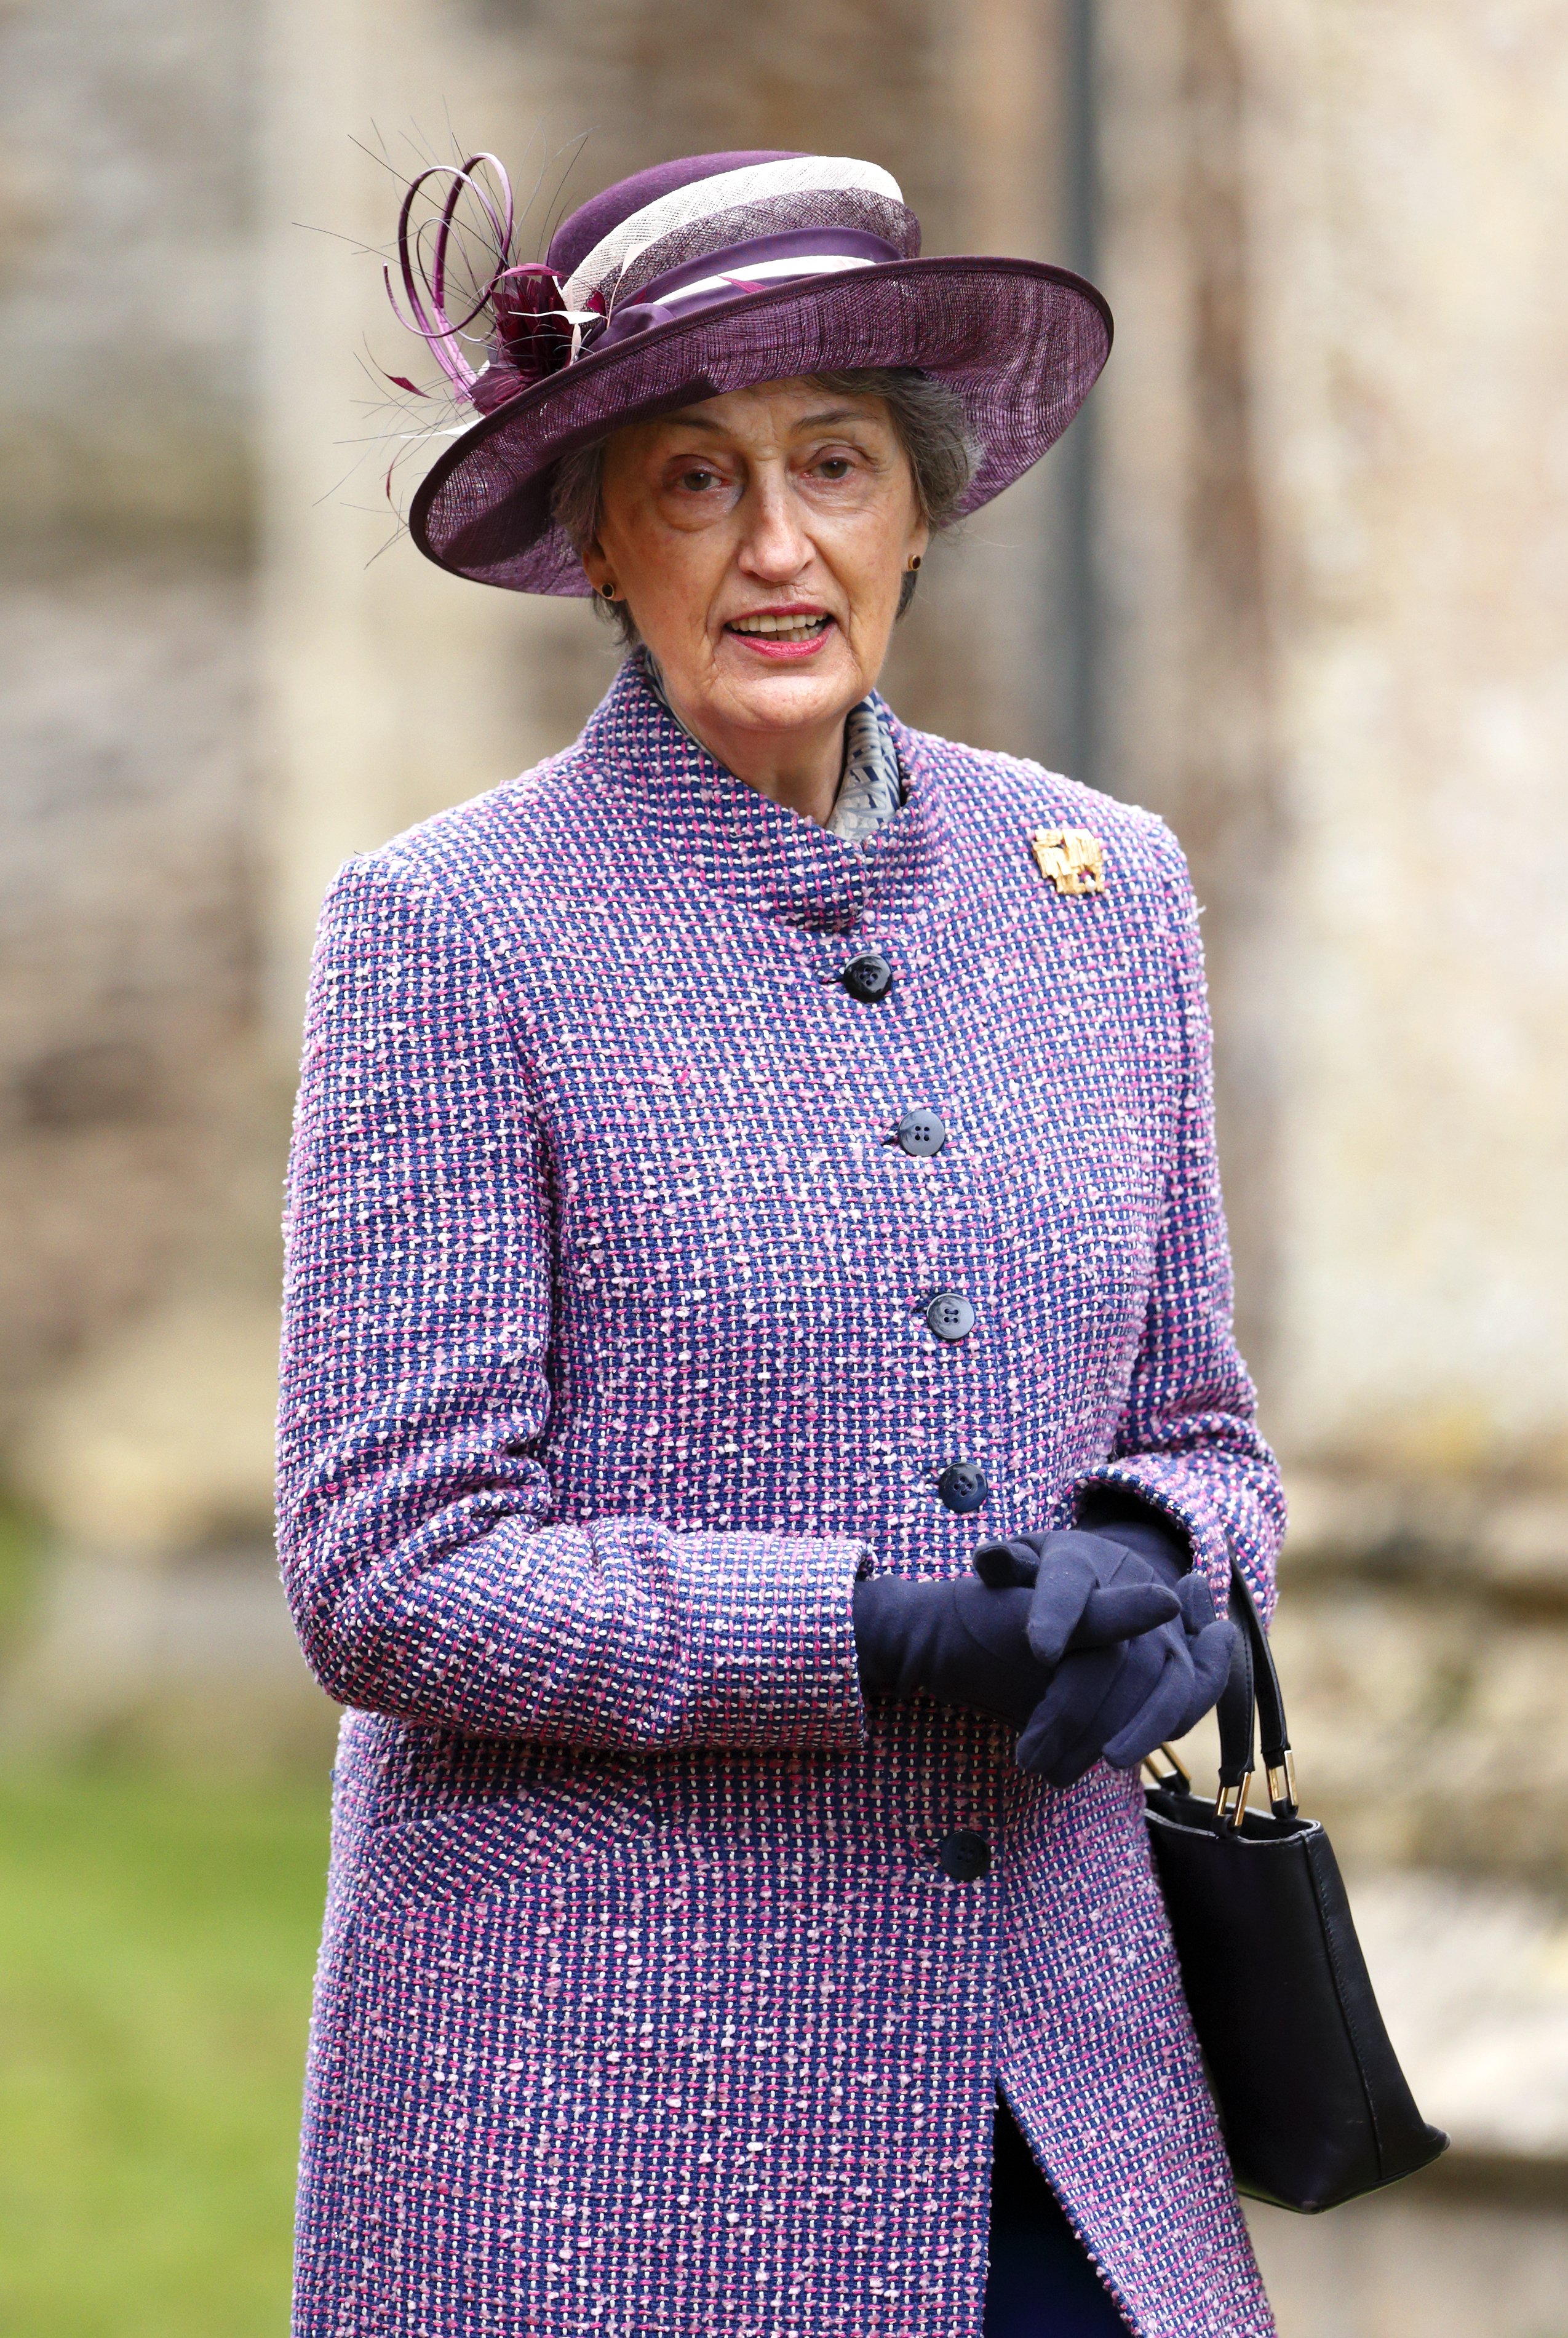 Lady Susan Hussey accompanies Queen Elizabeth II to Sunday service on January 19, 2014 in Norwich, England | Photo: Getty Images